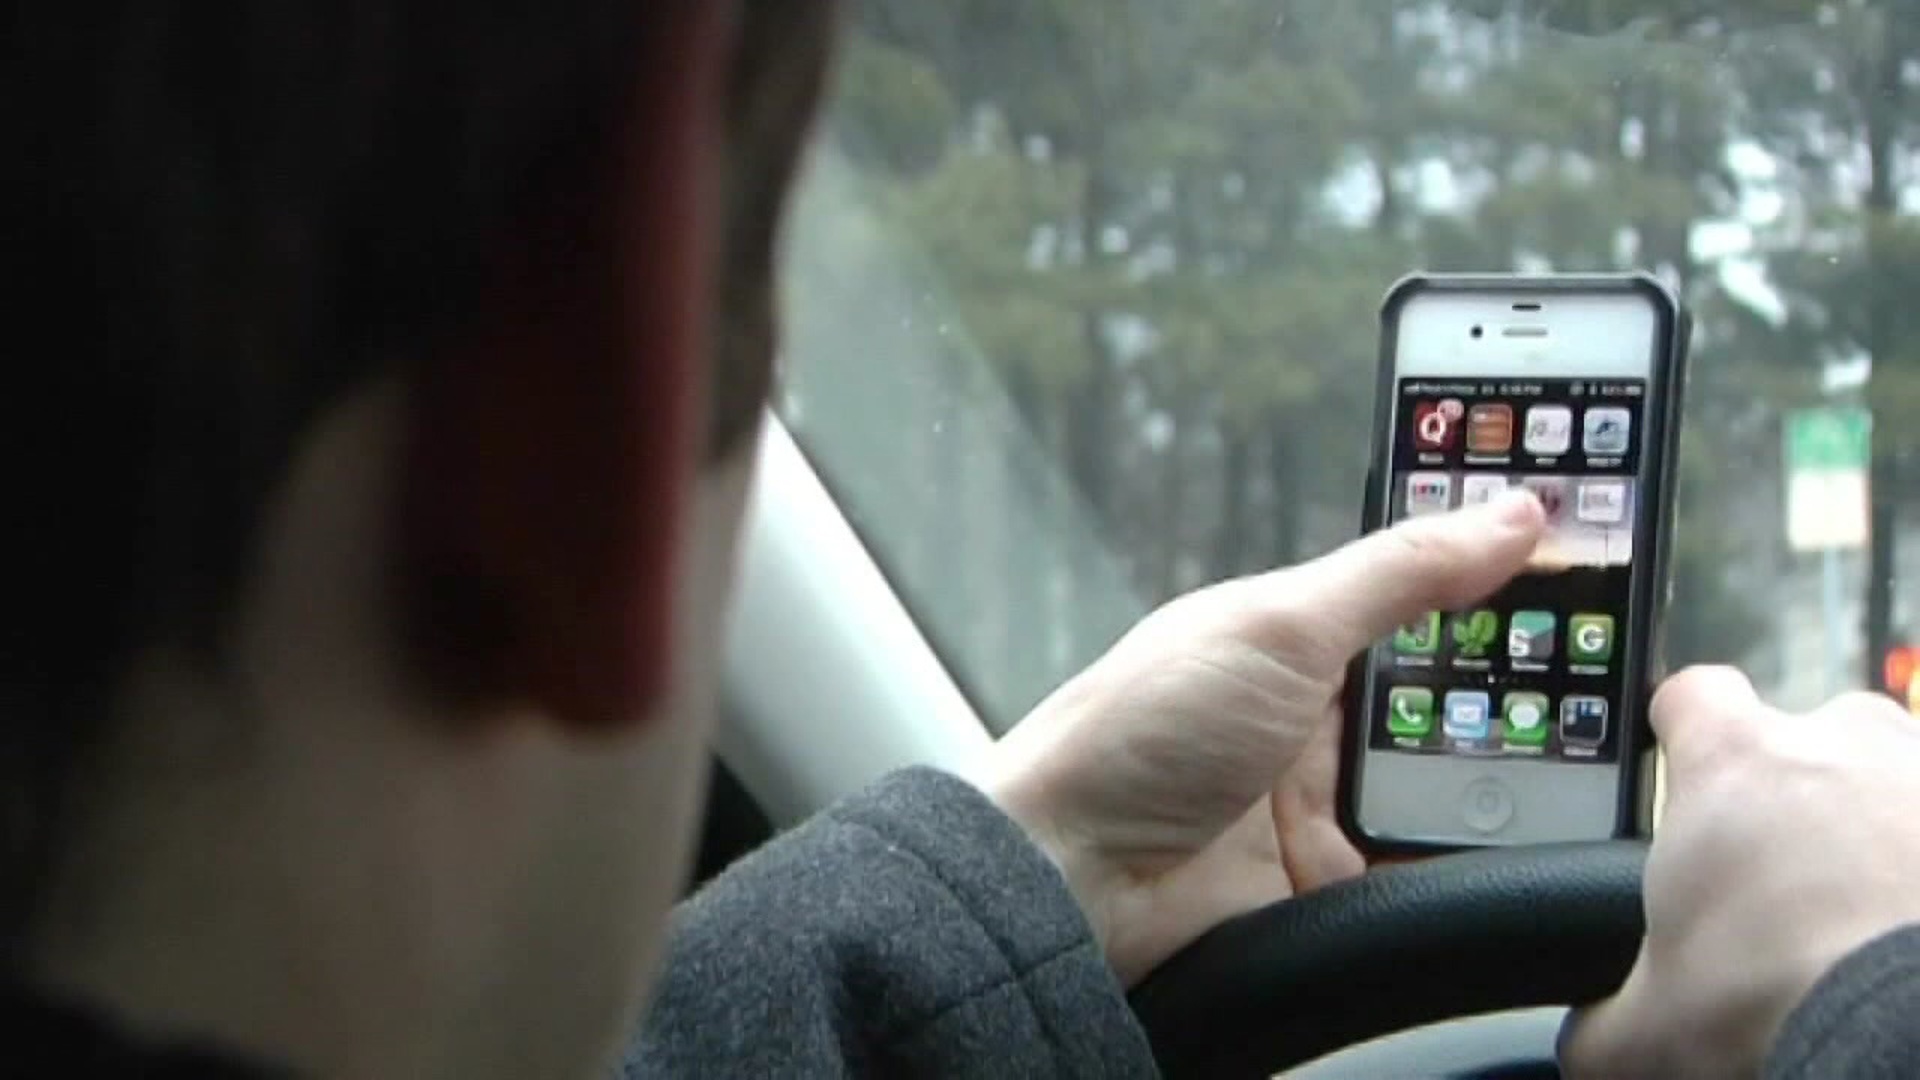 Newswatch 16's Emily Kress has reactions from drivers in the Poconos.